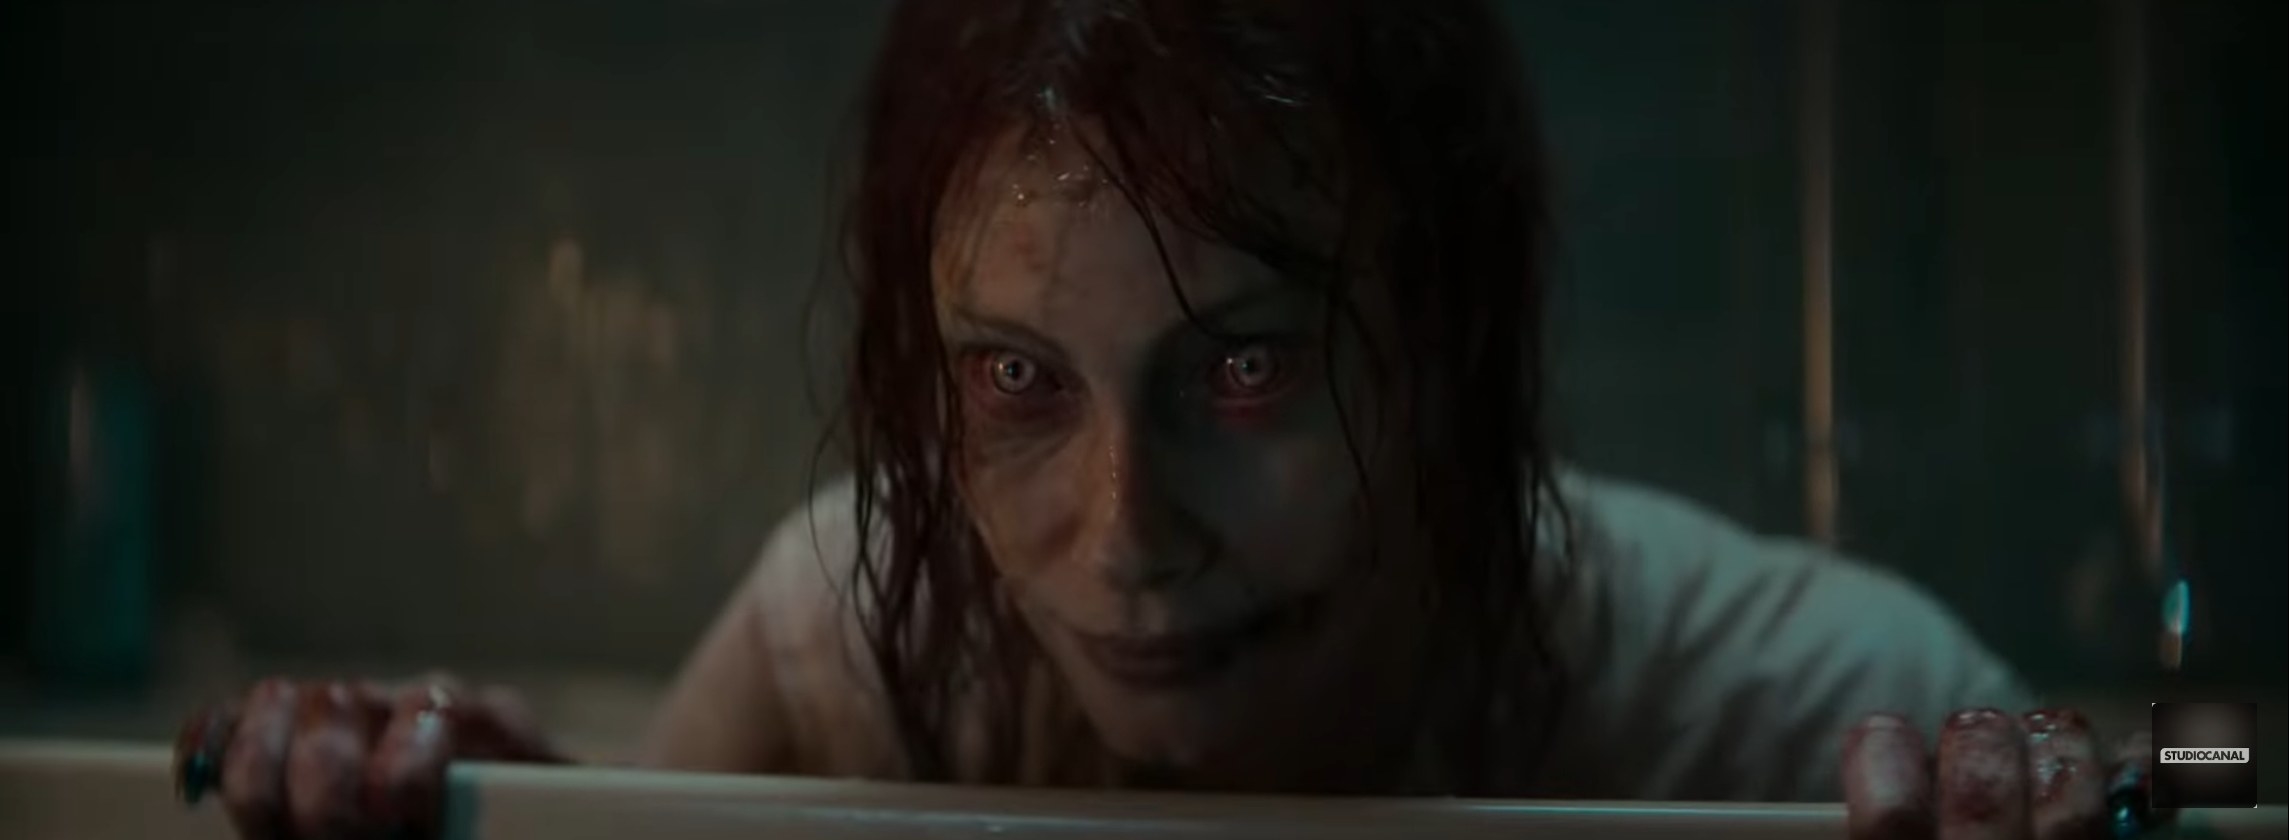 A ghoulish looking woman stares eerily in a bathtub